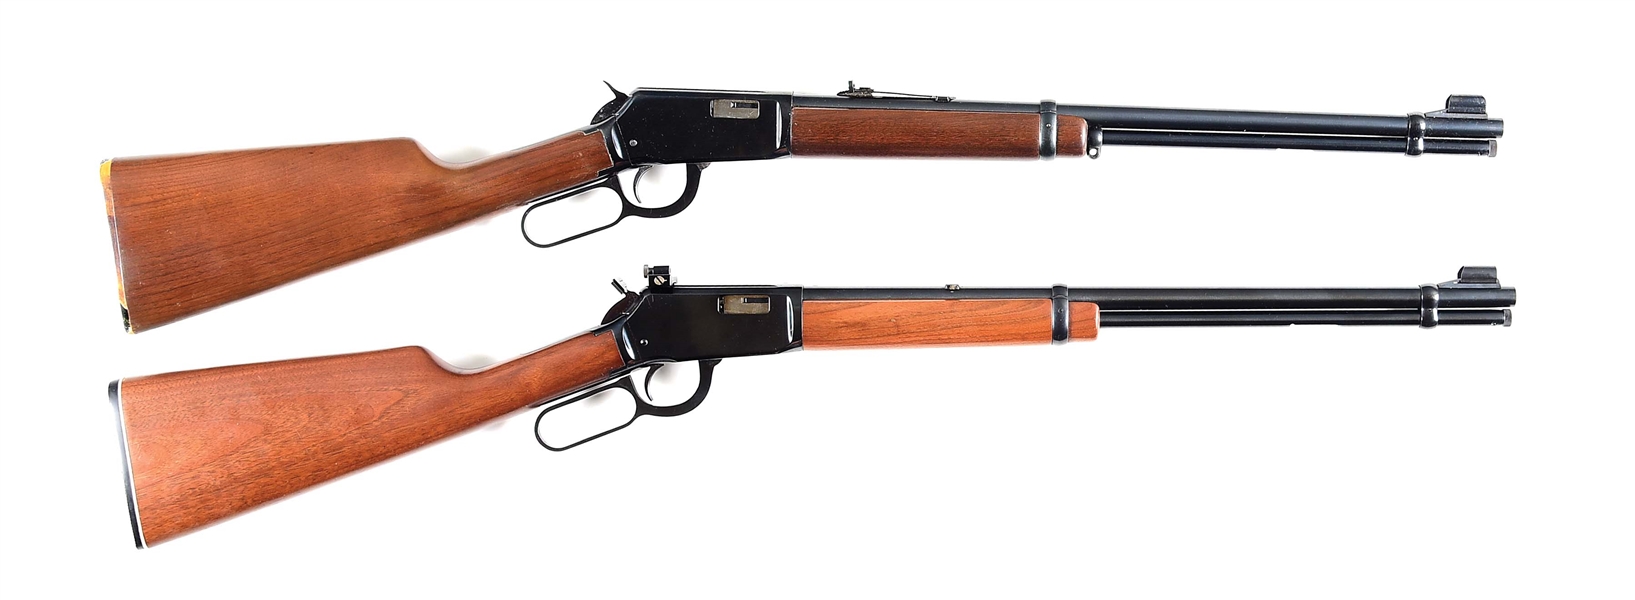 (M) LOT OF 2 WINCHESTER 9422 LEVER ACTION RIFLES.